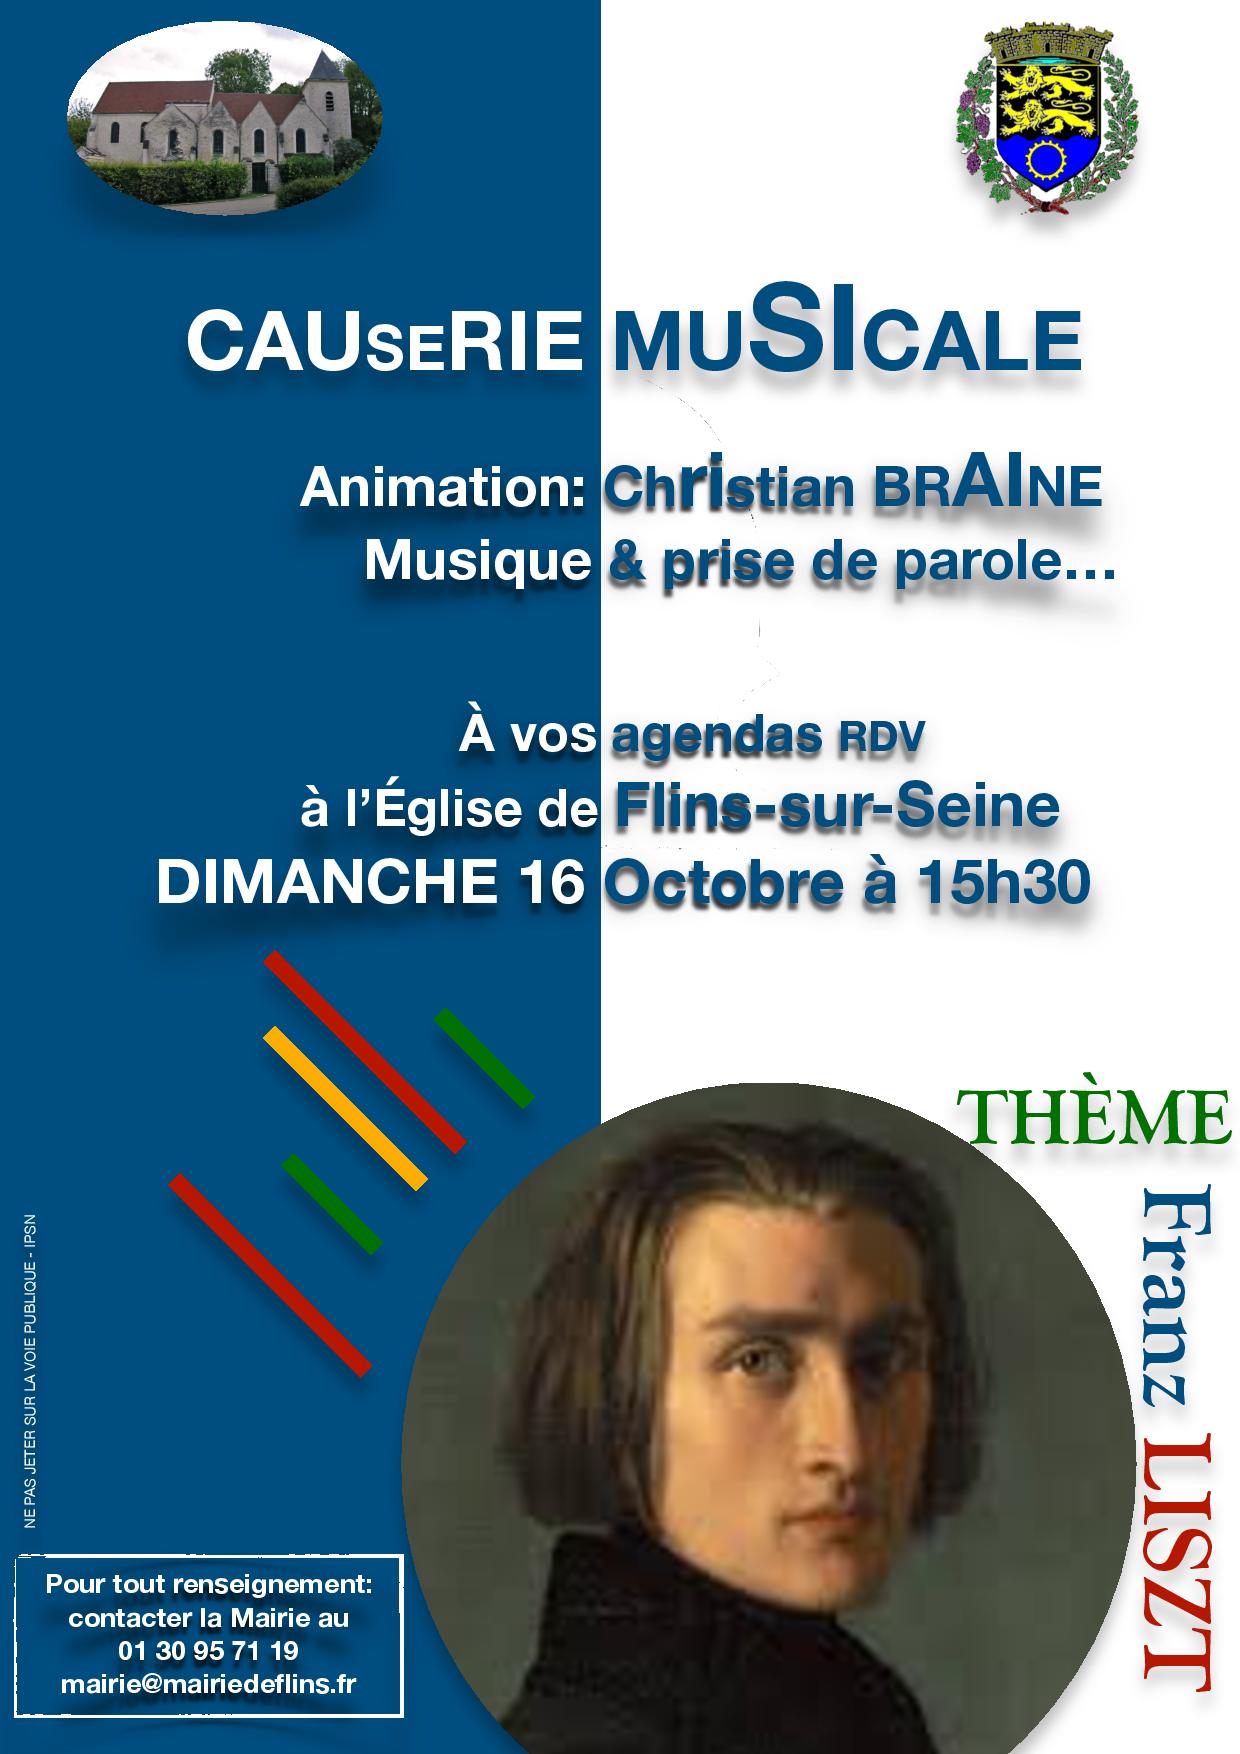 Causerie Musicale V2-page-001.jpg